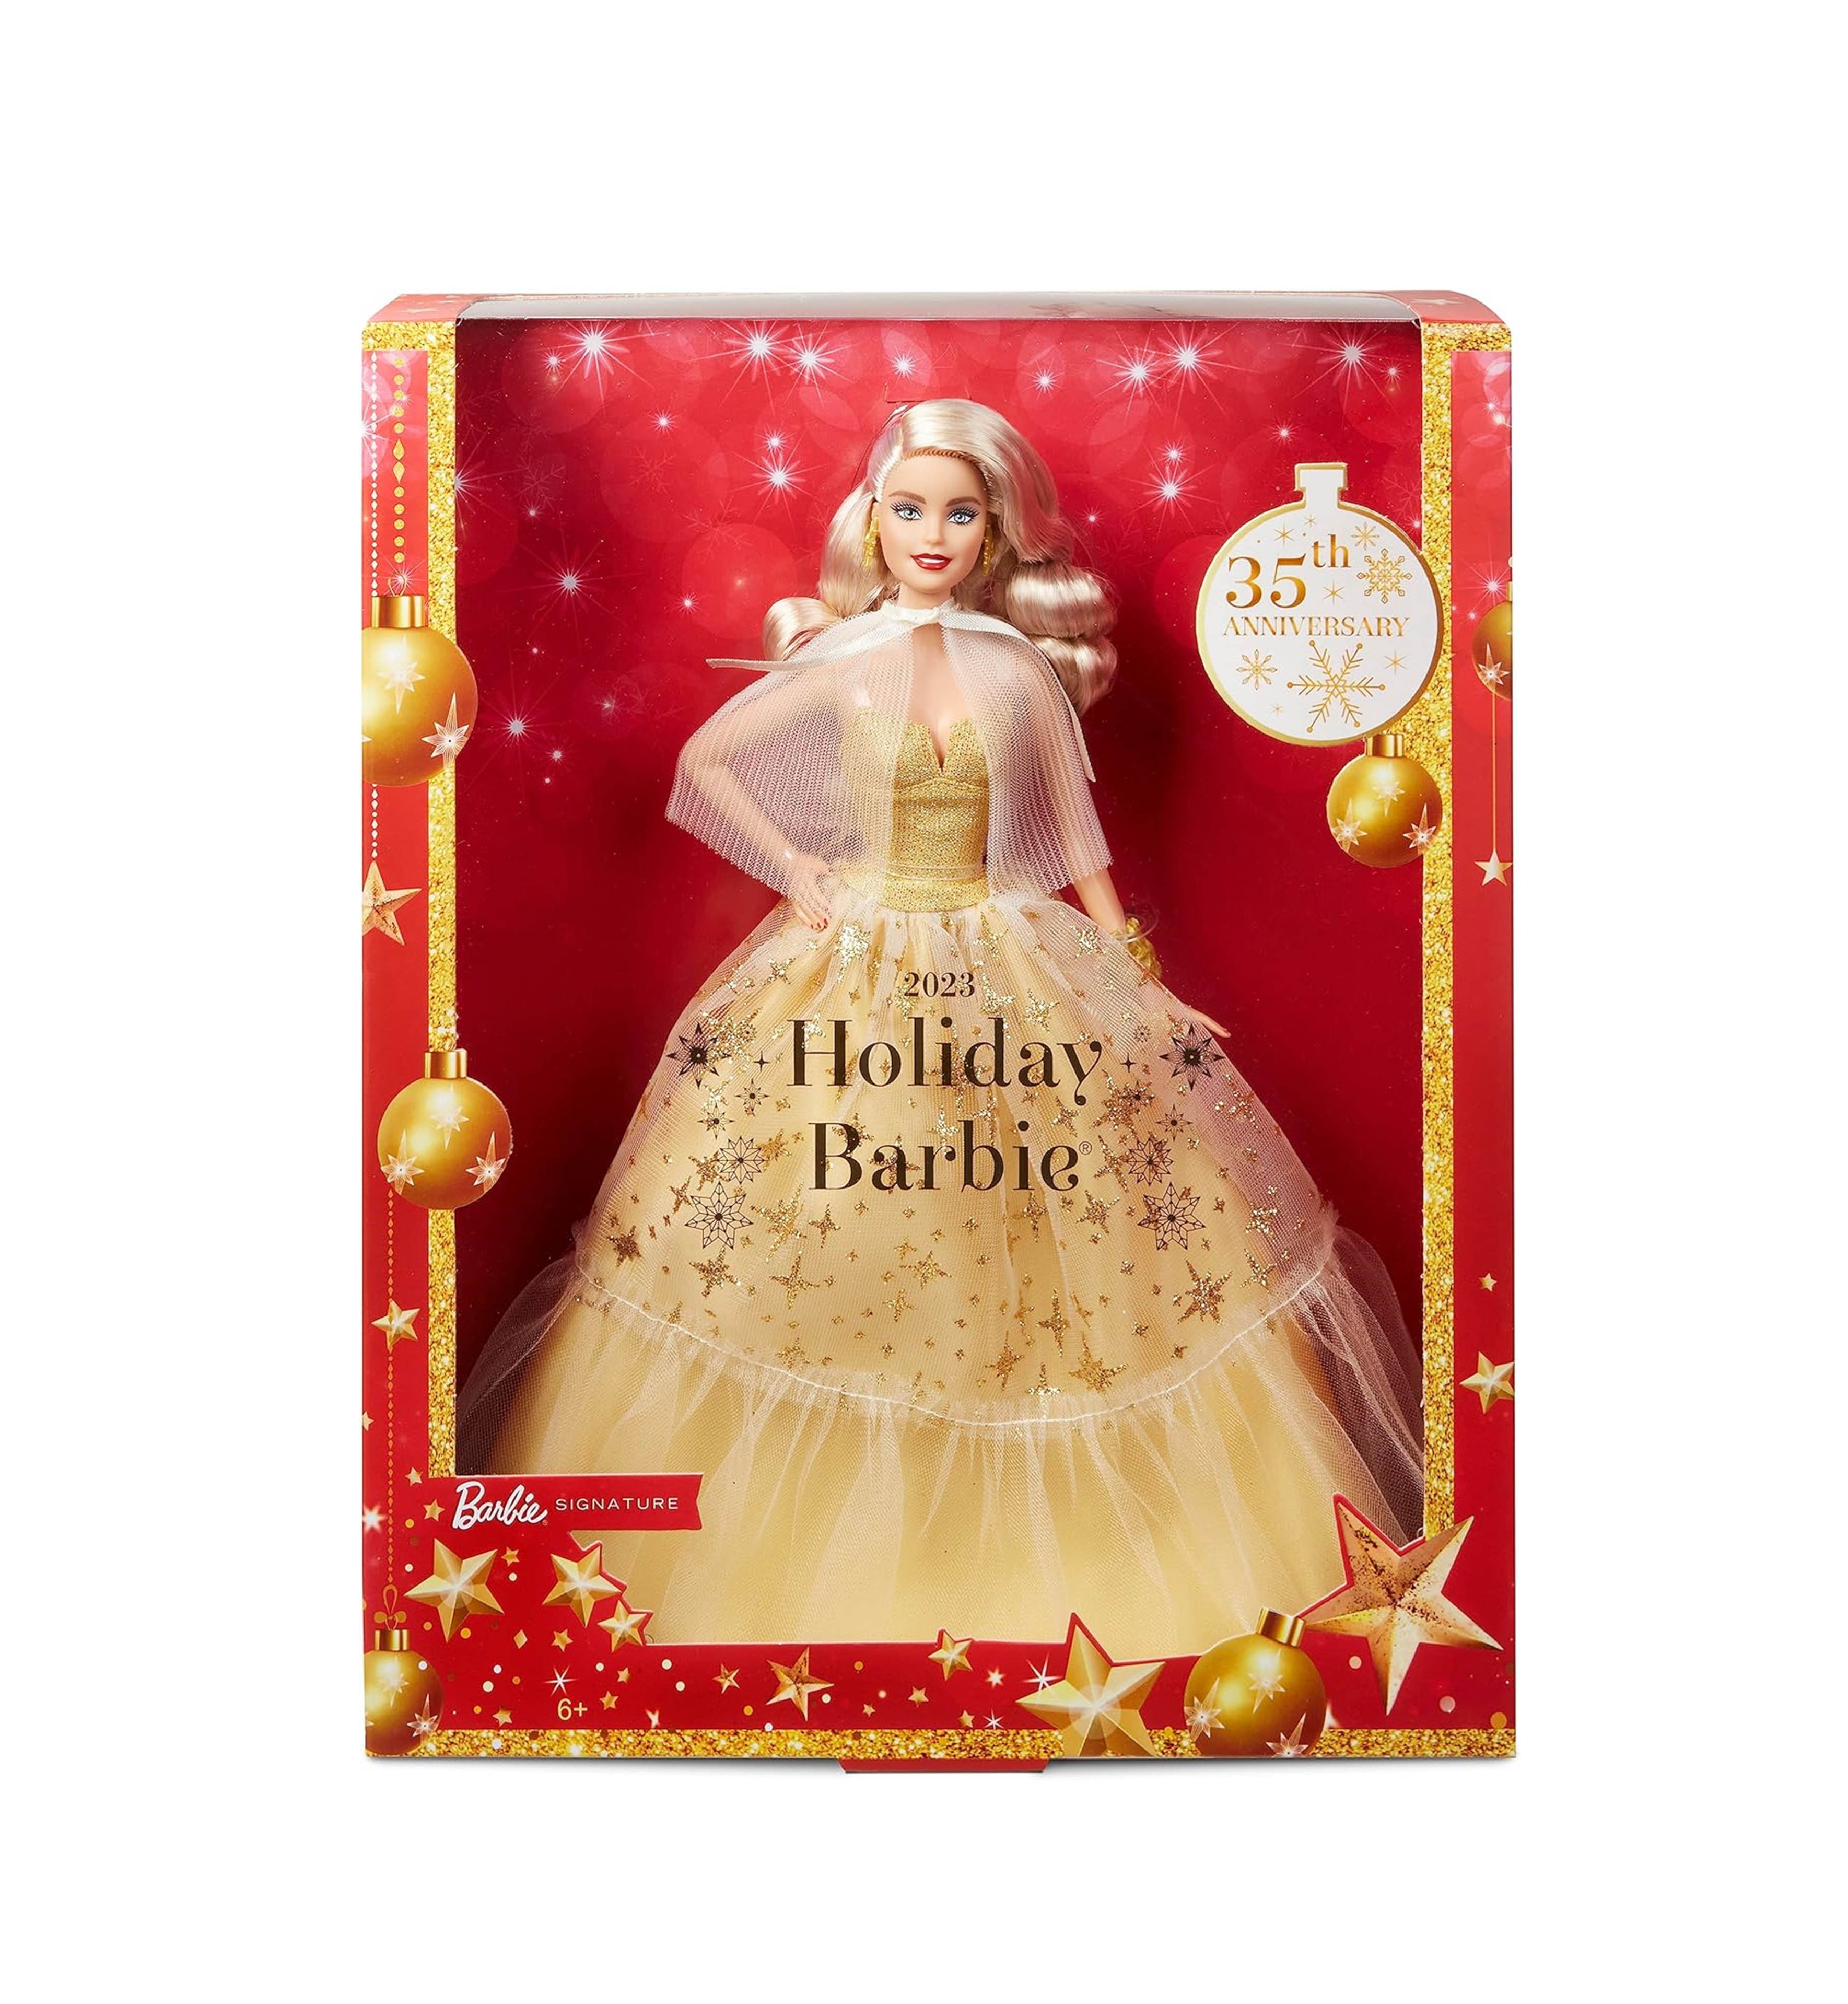 2023 Holiday Barbie Doll, Seasonal Collector Gift, Barbie Signature, G